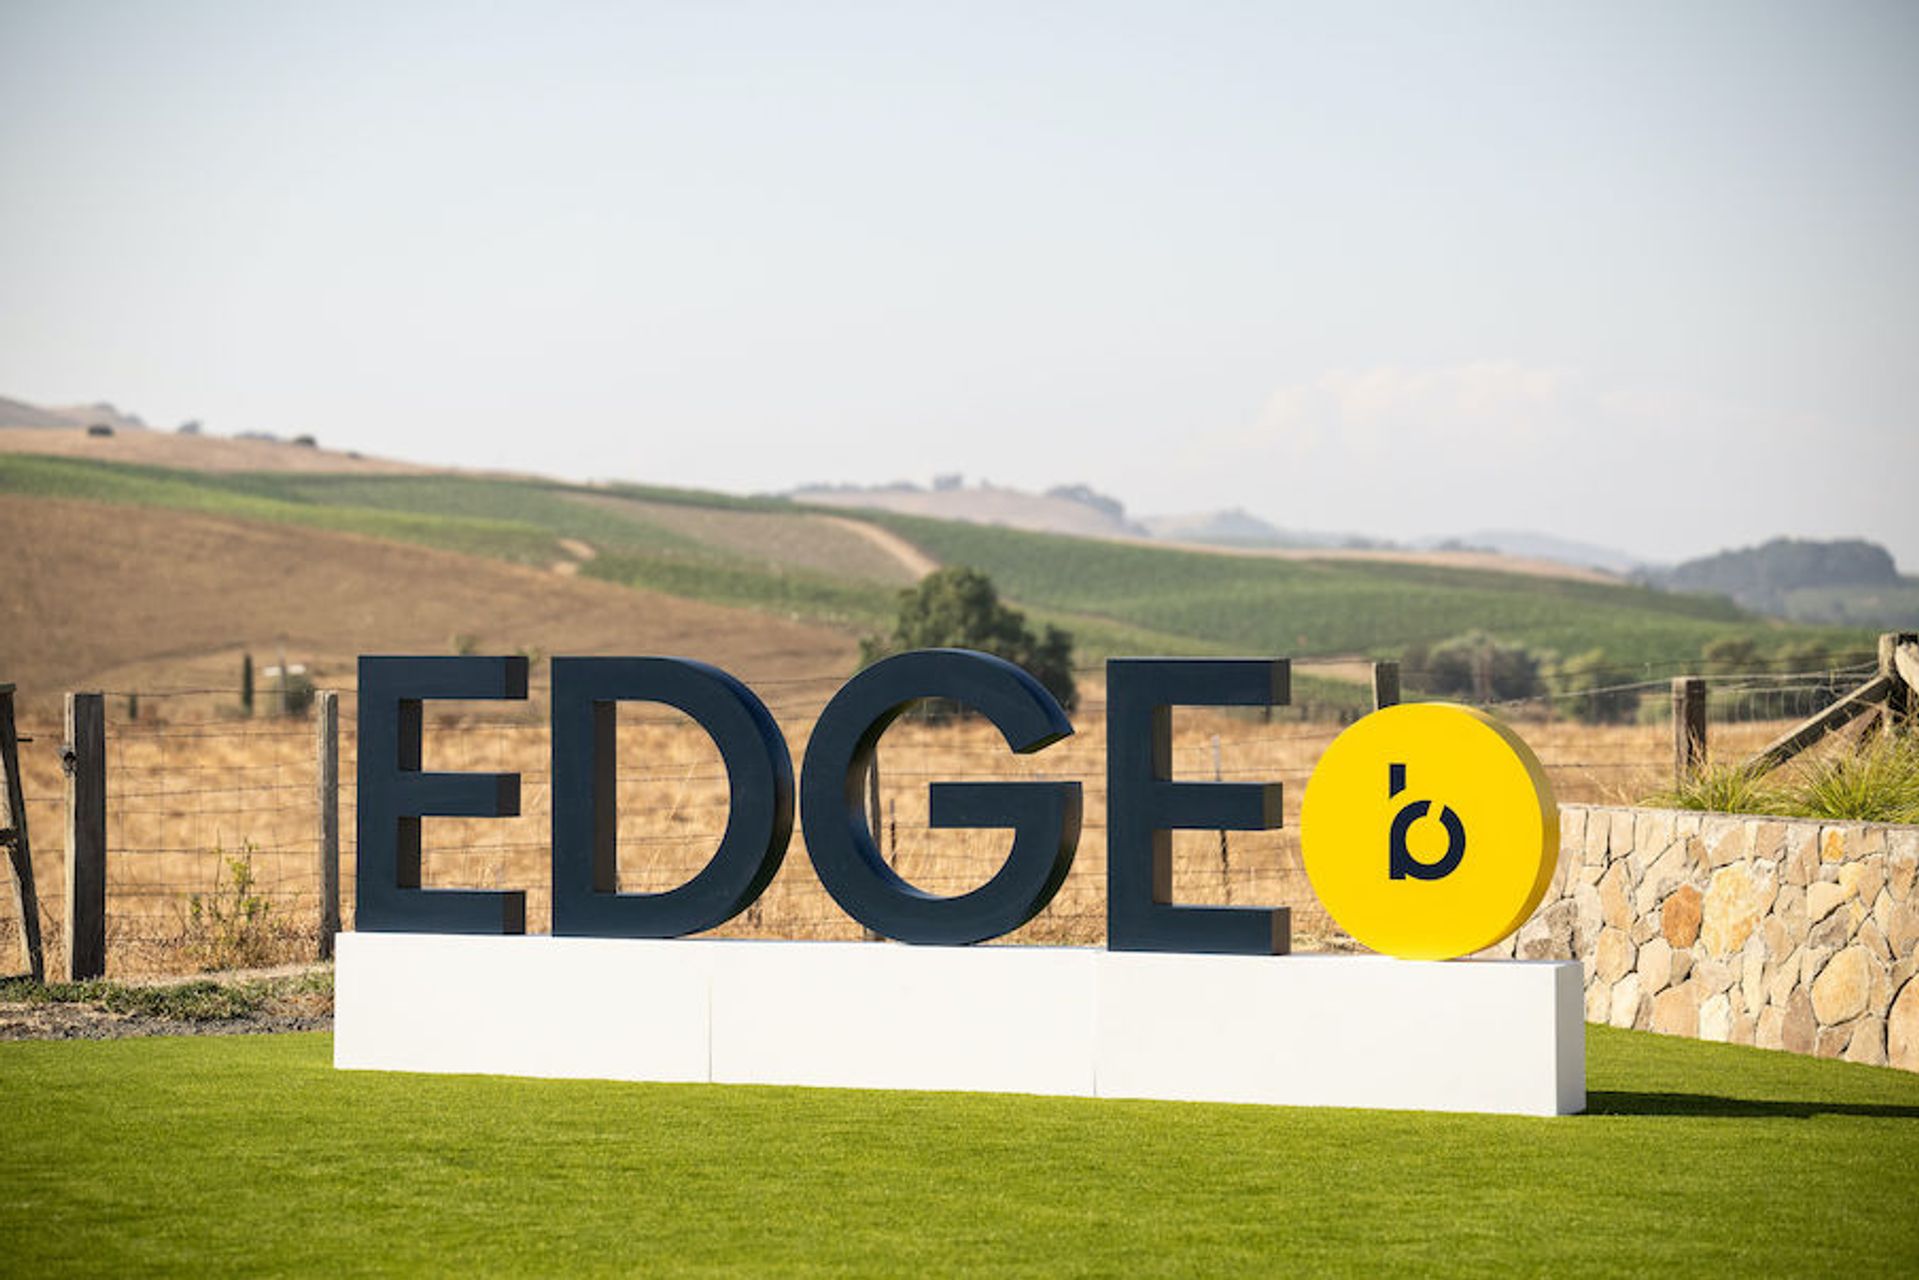 An installation sign of the word "EDGE" with napa valley in the background